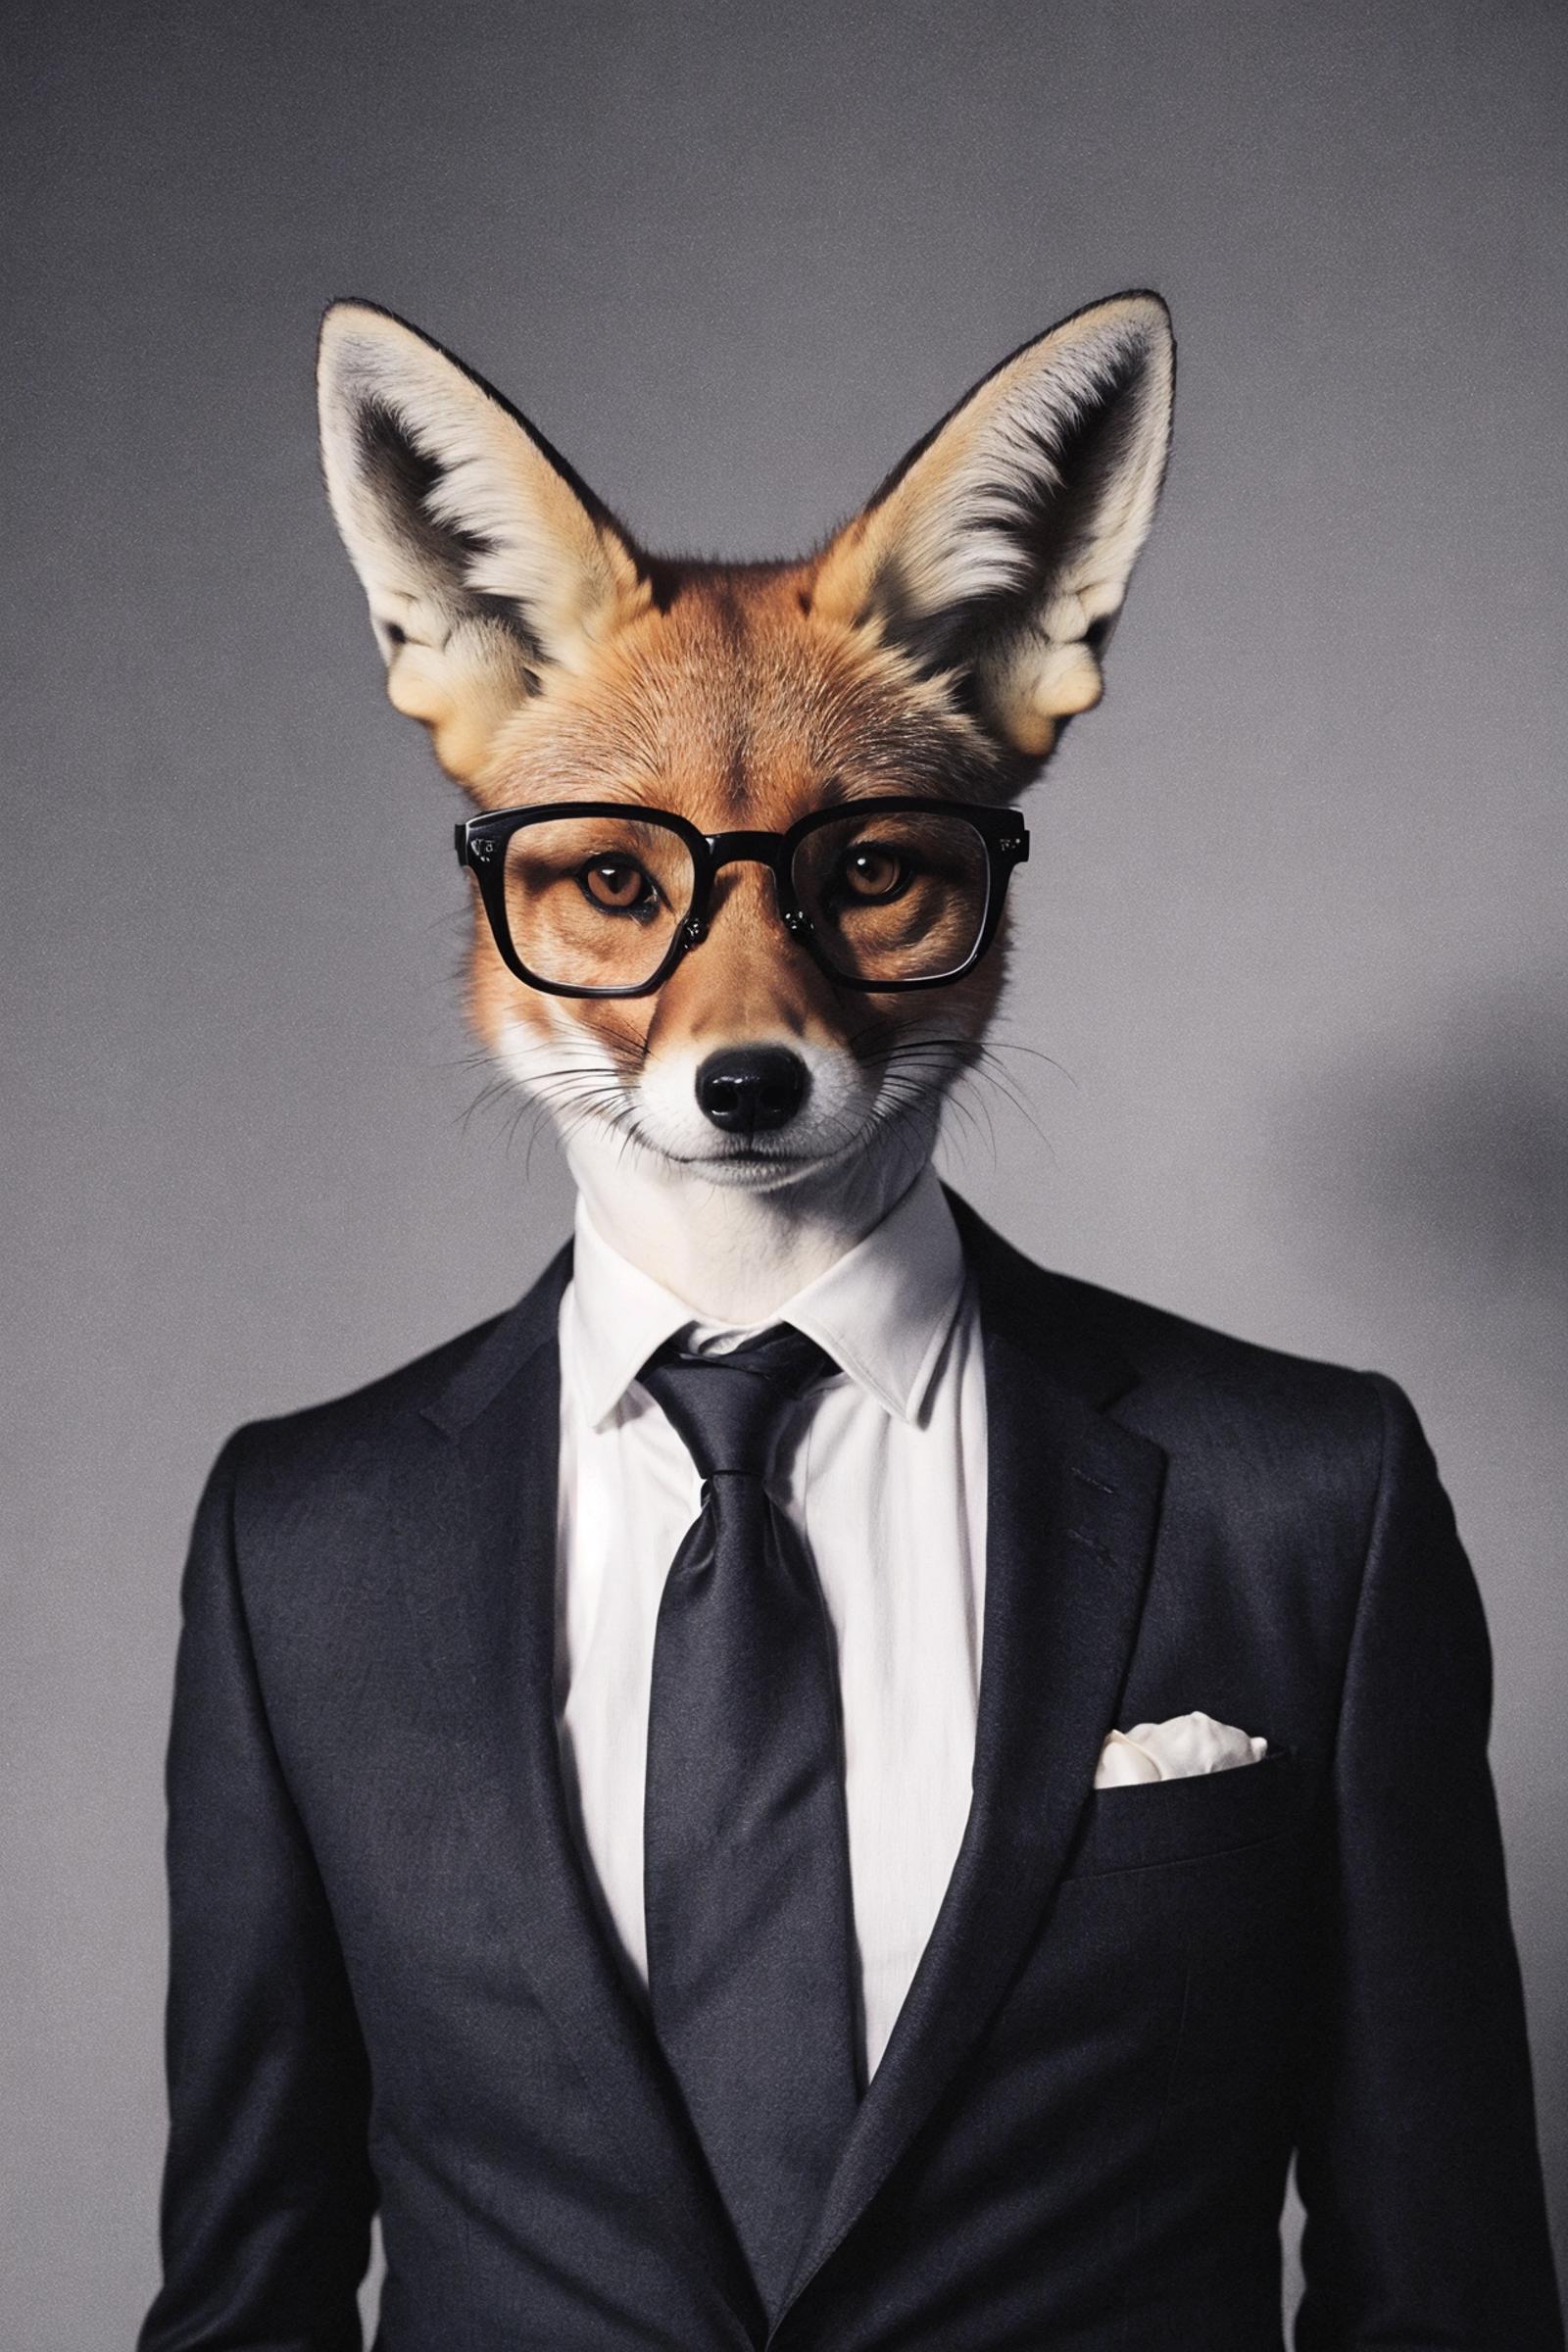 A man wearing a suit and glasses is wearing a fox mask.